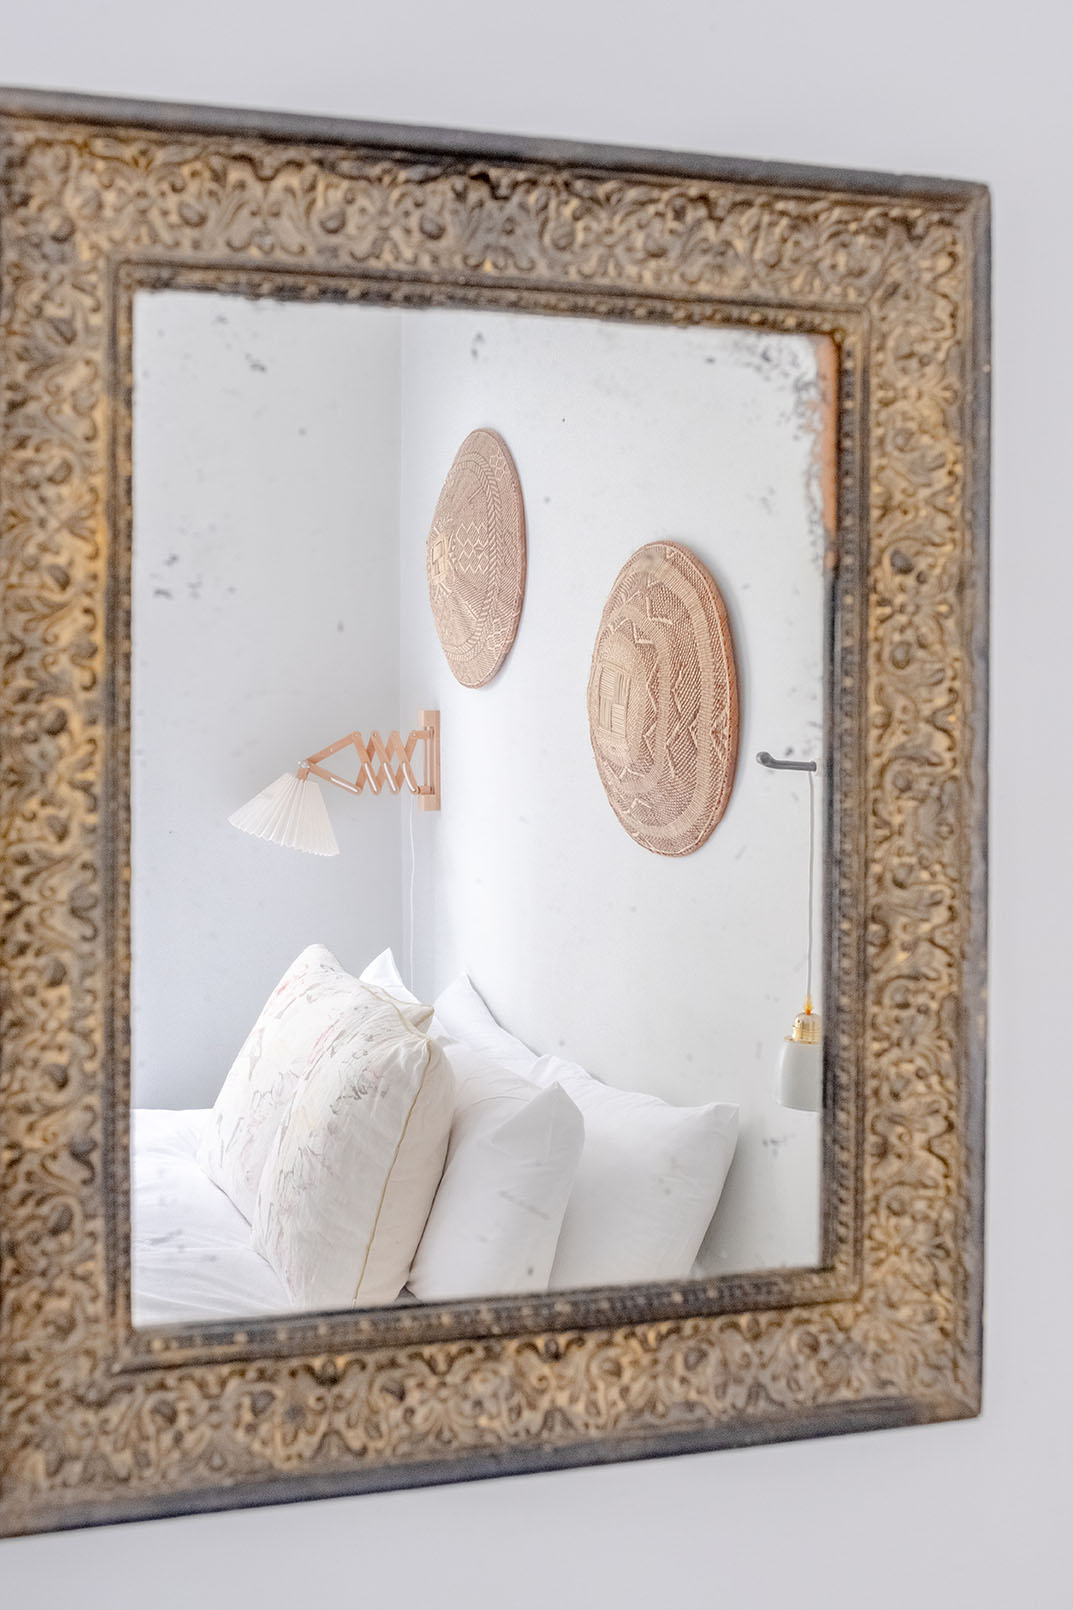 Reflection of a double bed with white linens and decorative items on the wall, shot for property photography.